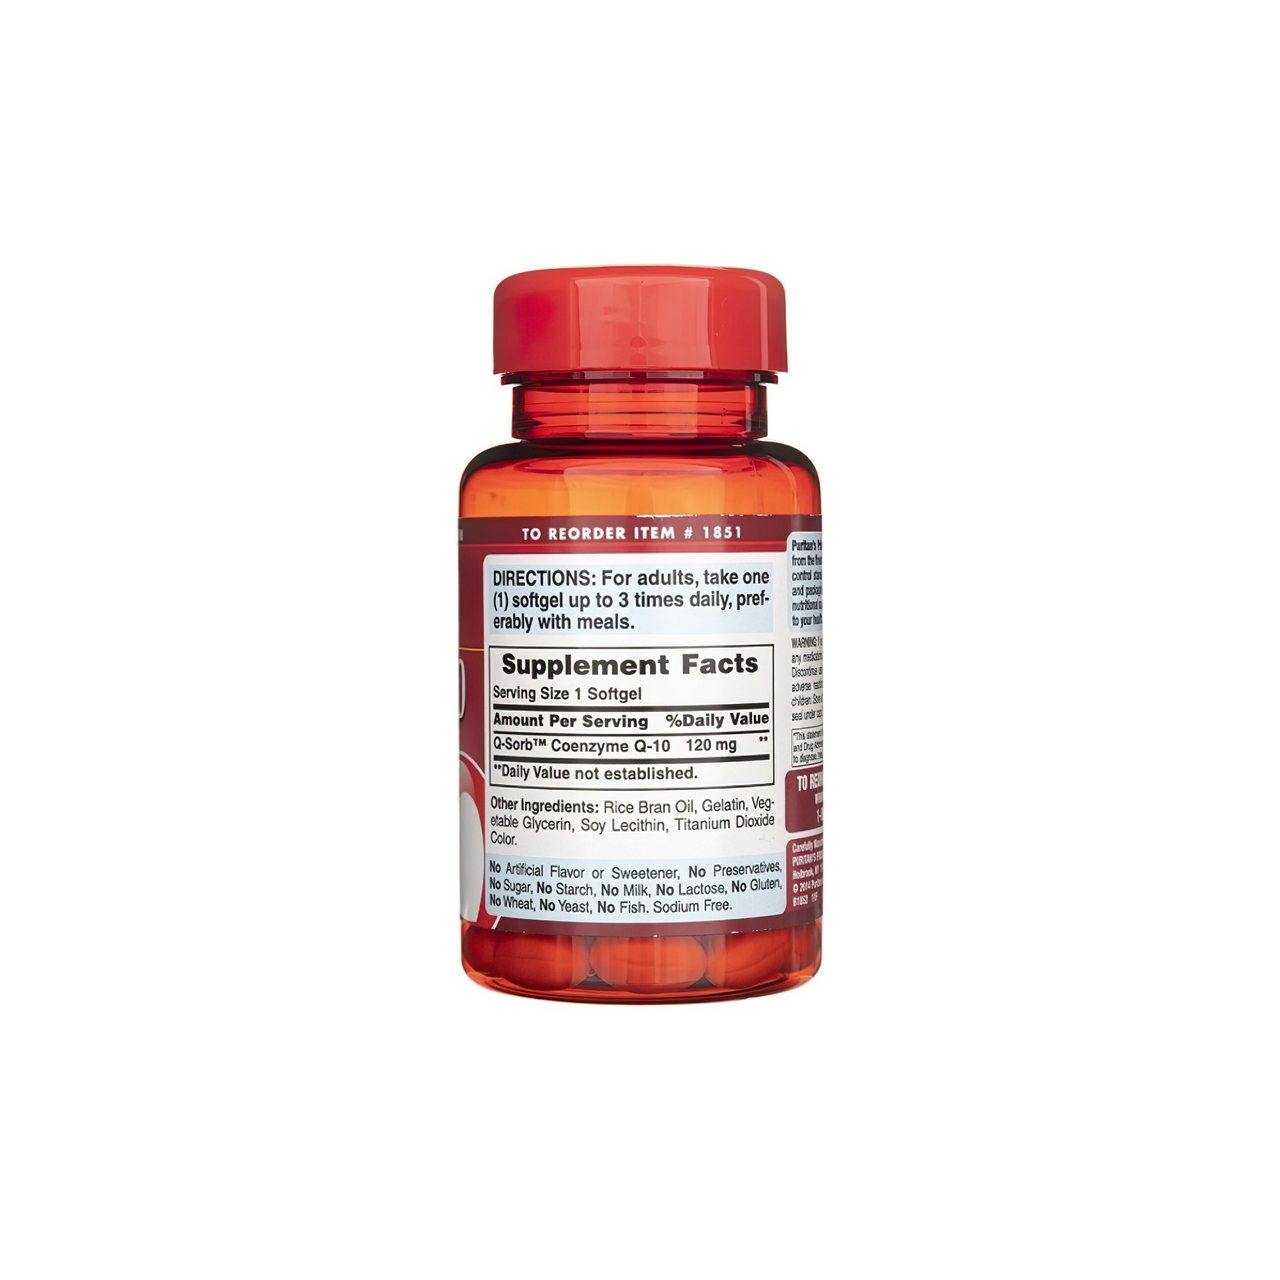 A bottle of Puritan's Pride Coenzyme Q10 - 120 mg 60 Rapid Release softgels on a white background.